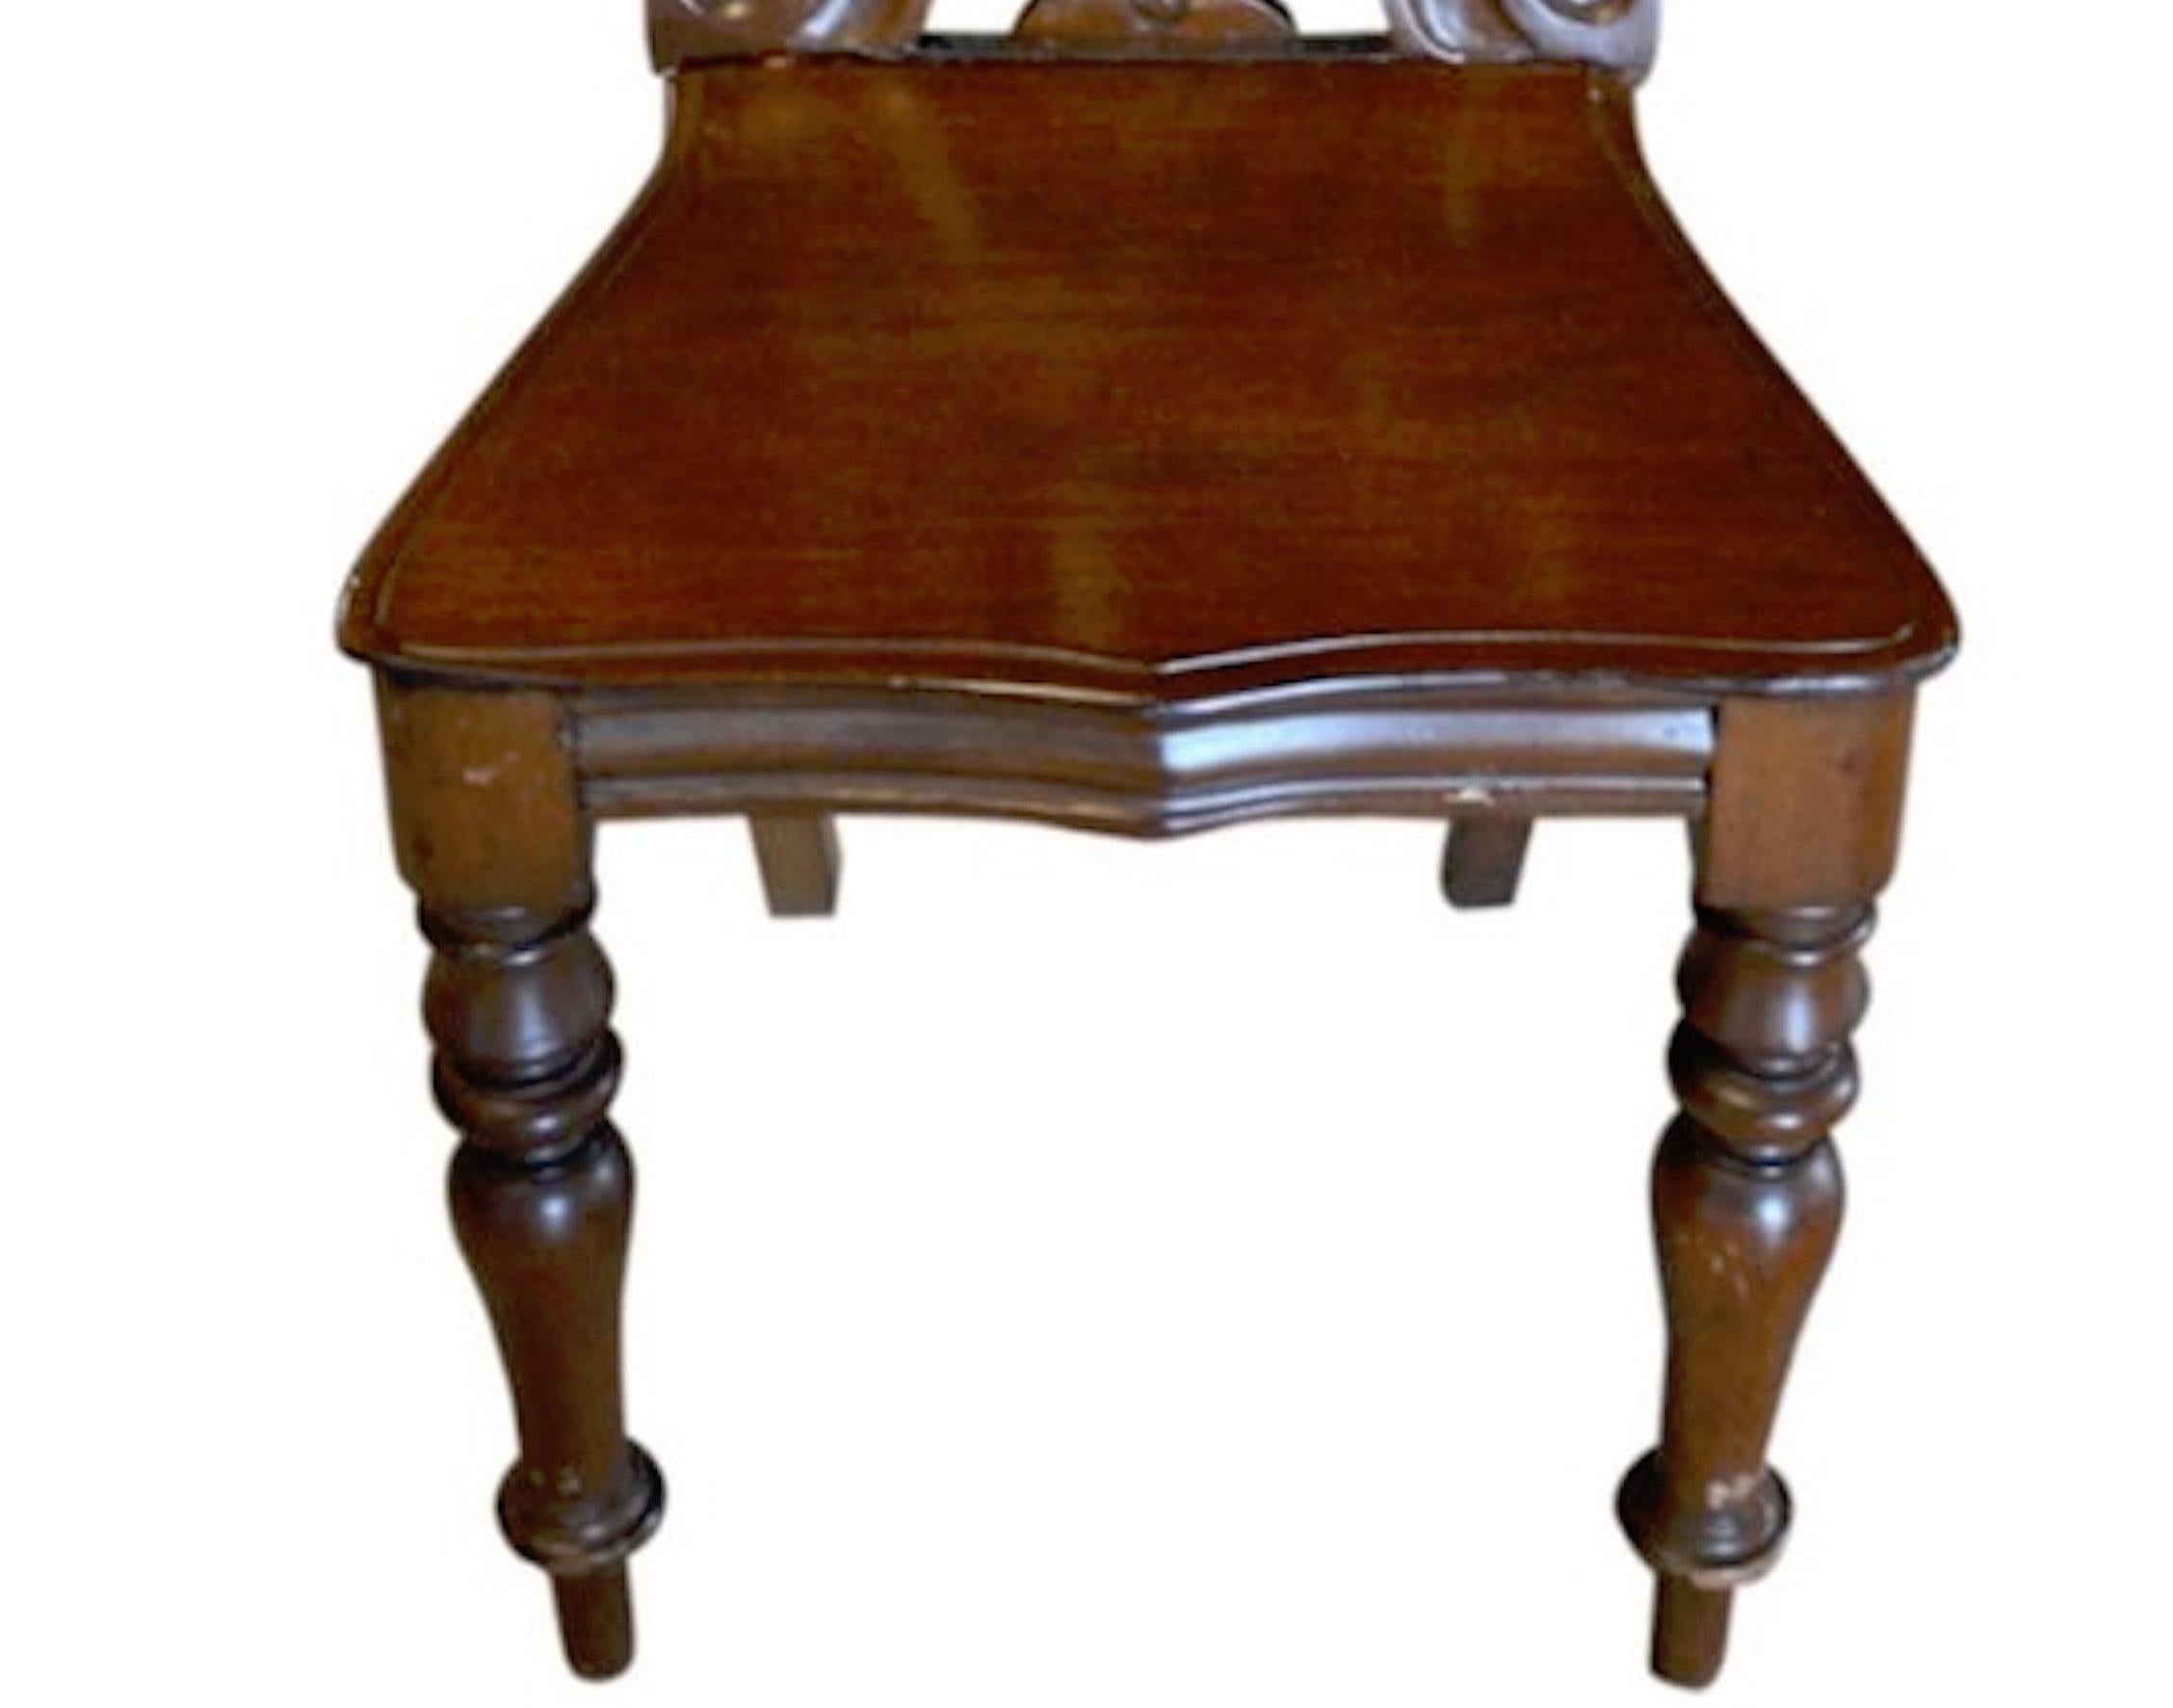 A good single English mahogany hall chair of solid walnut with finely detailed scroll work.